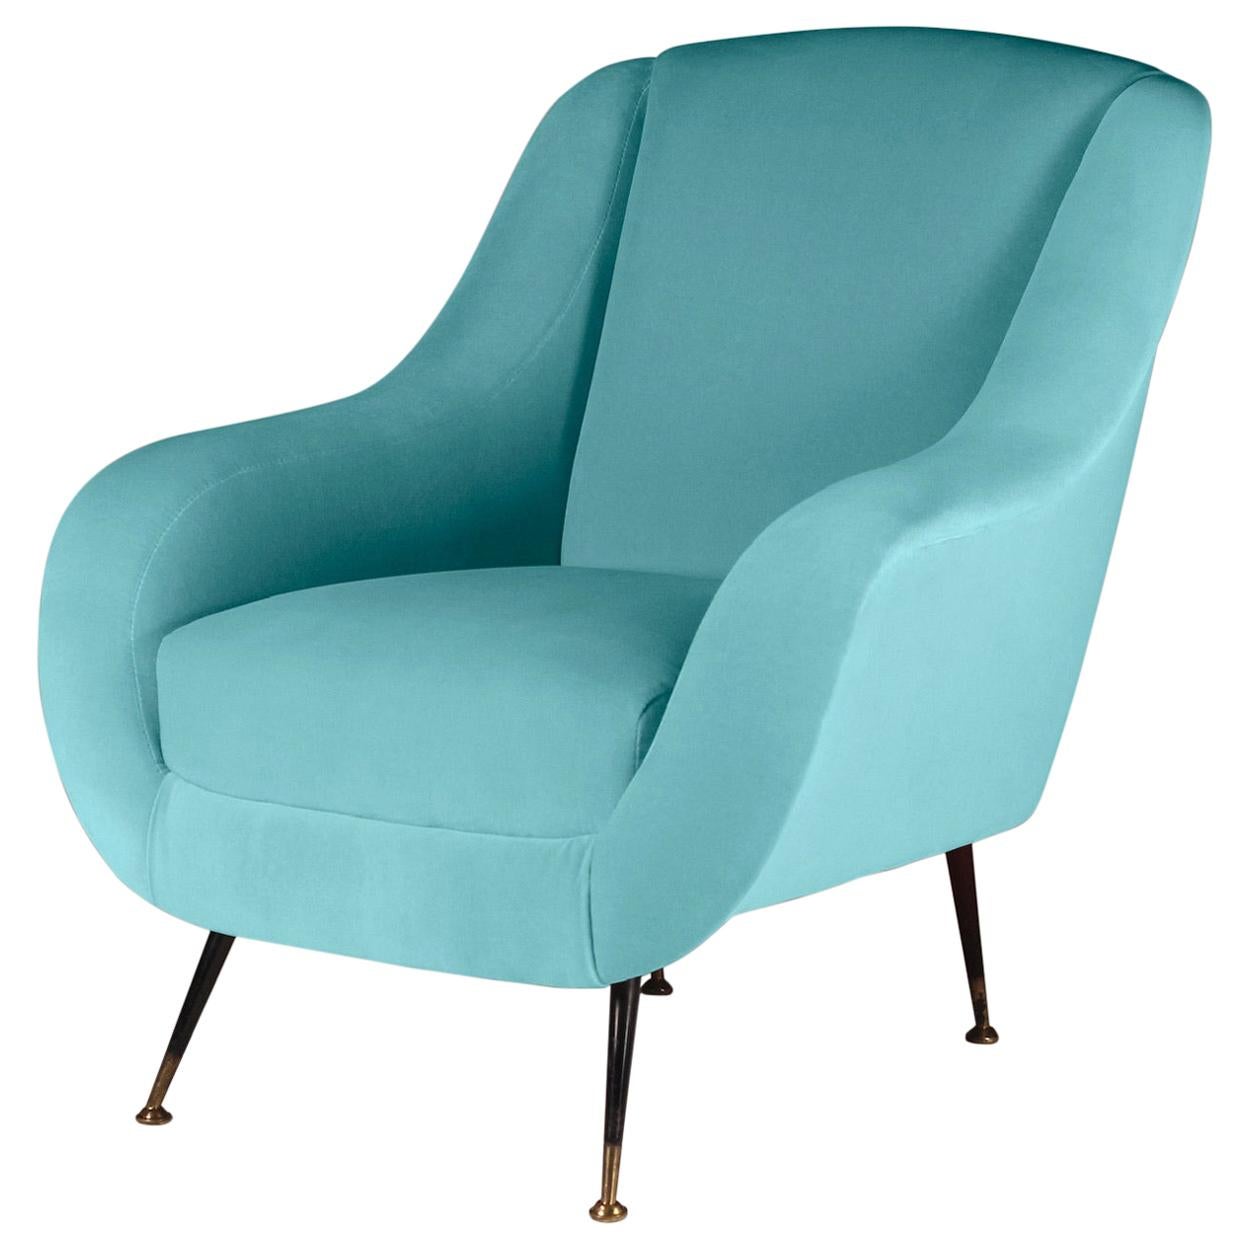 Midcentury Style Italian Lounge Chair in Turquoise For Sale